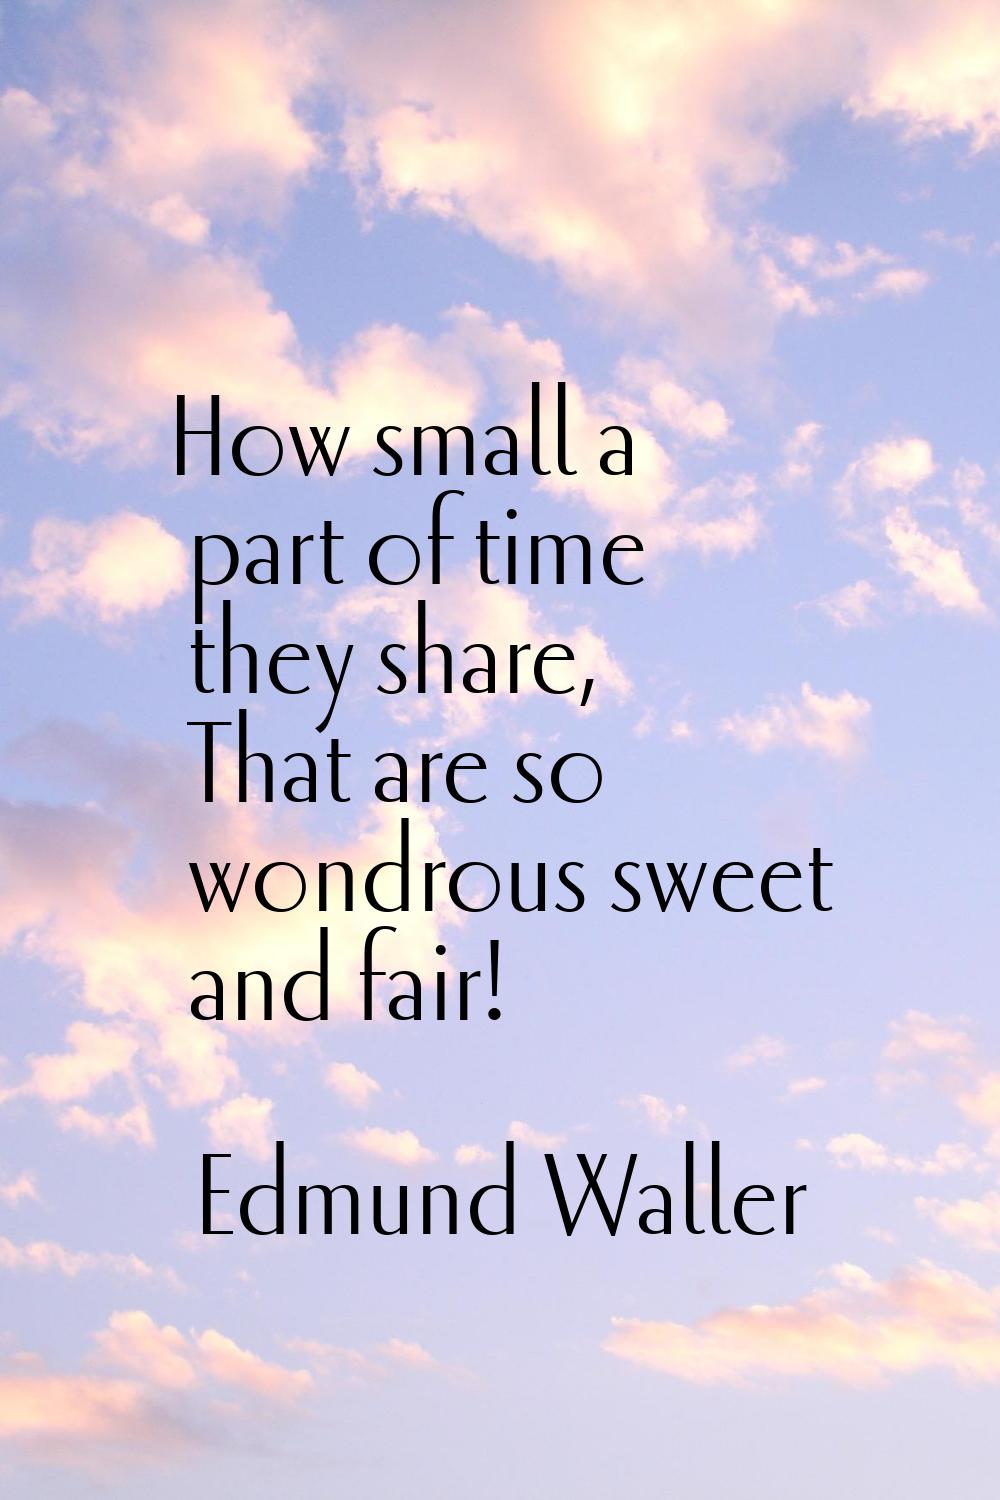 How small a part of time they share, That are so wondrous sweet and fair!